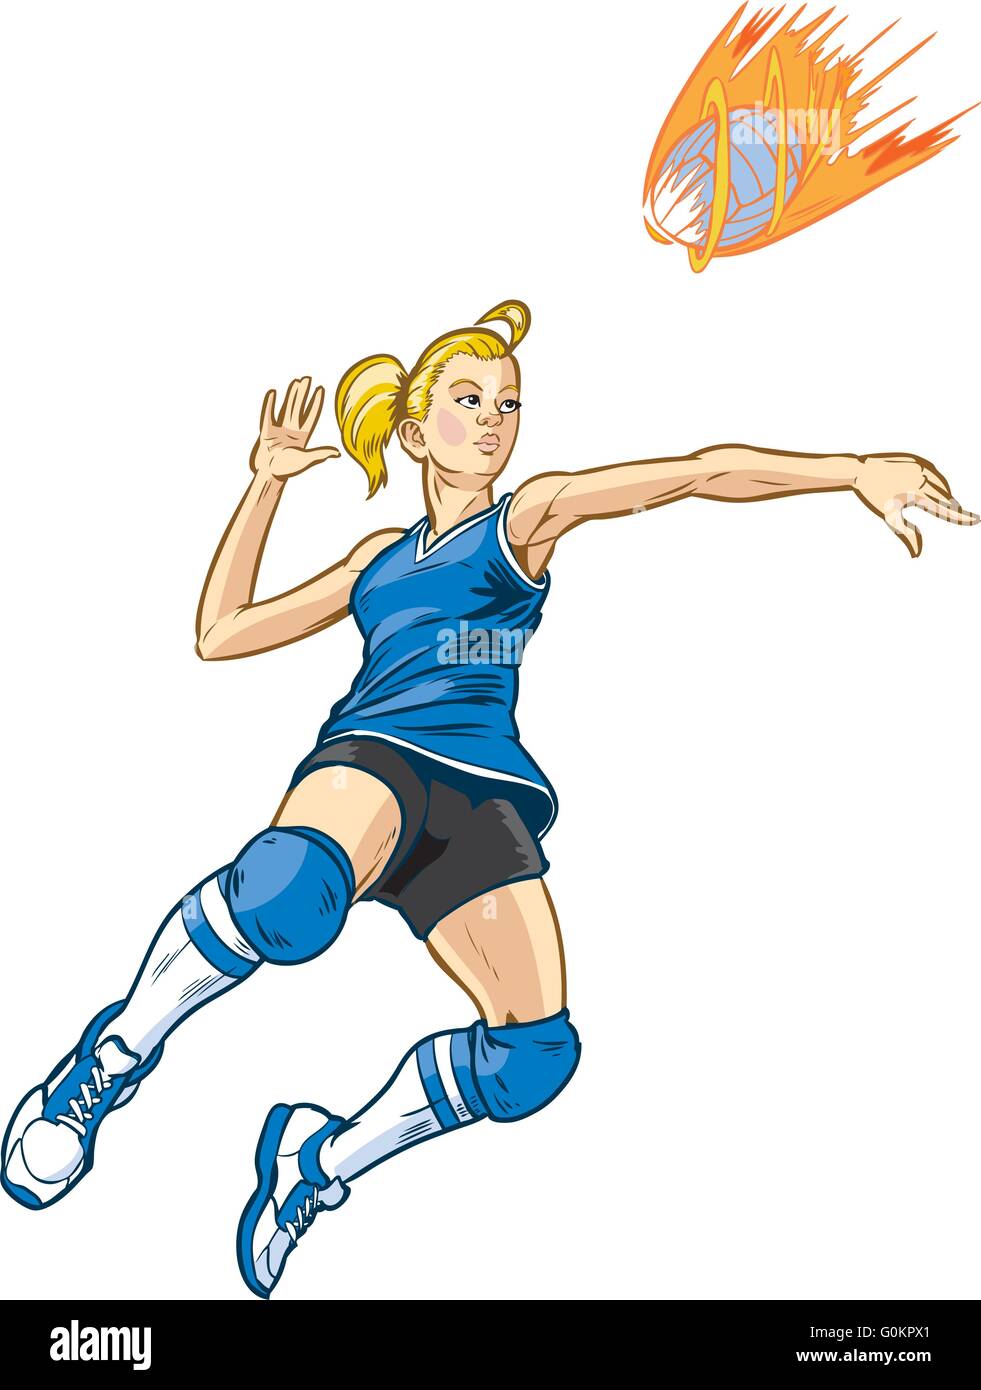 Girl volleyball player jumping to spike an incoming serve that looks like a fire ball. Stock Vector